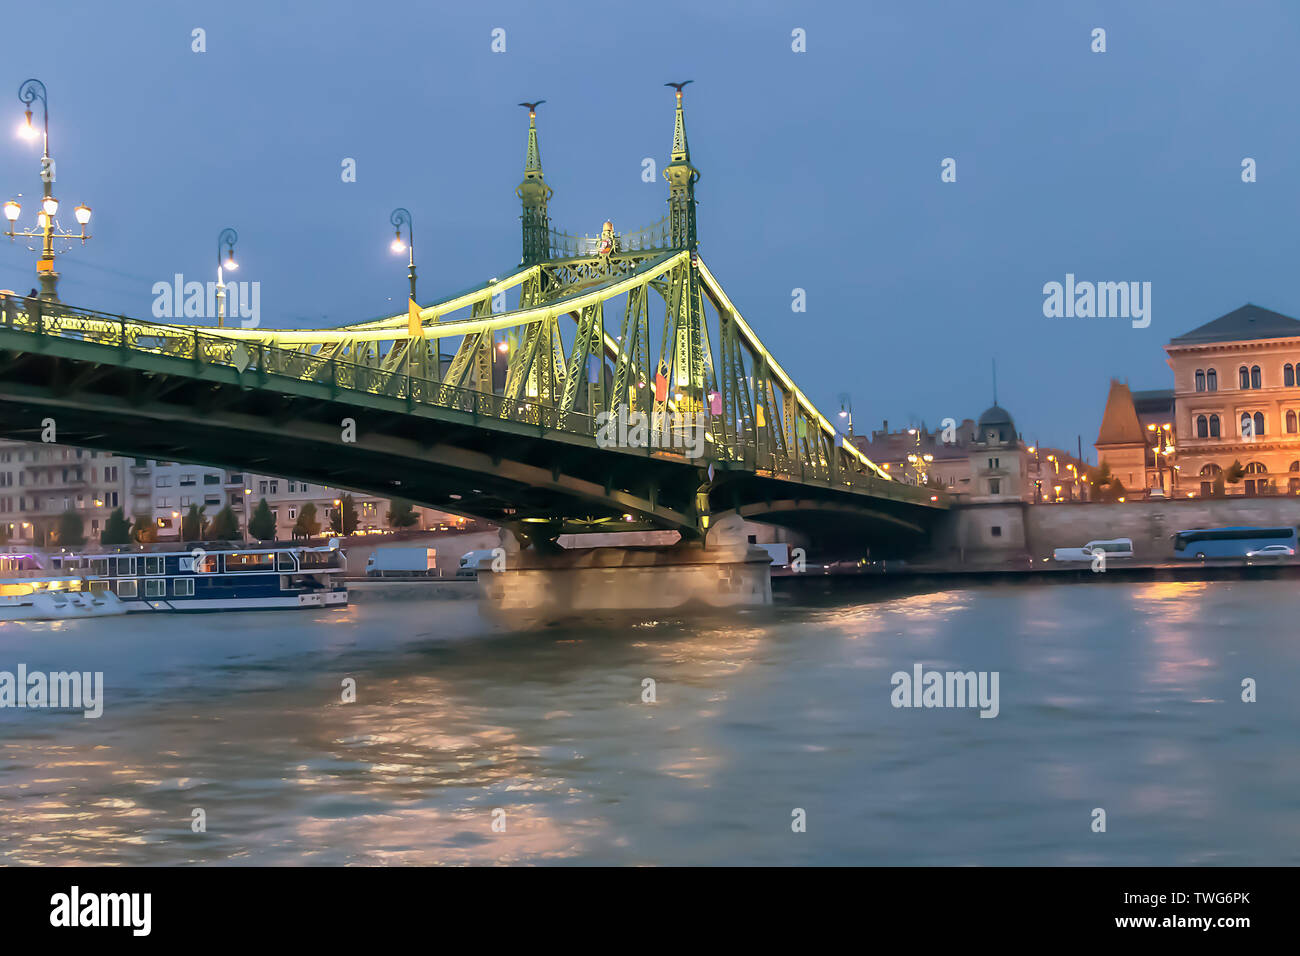 View of Szabadság híd (Liberty Bridge or Freedom Bridge) in Budapest from cruise boat Stock Photo